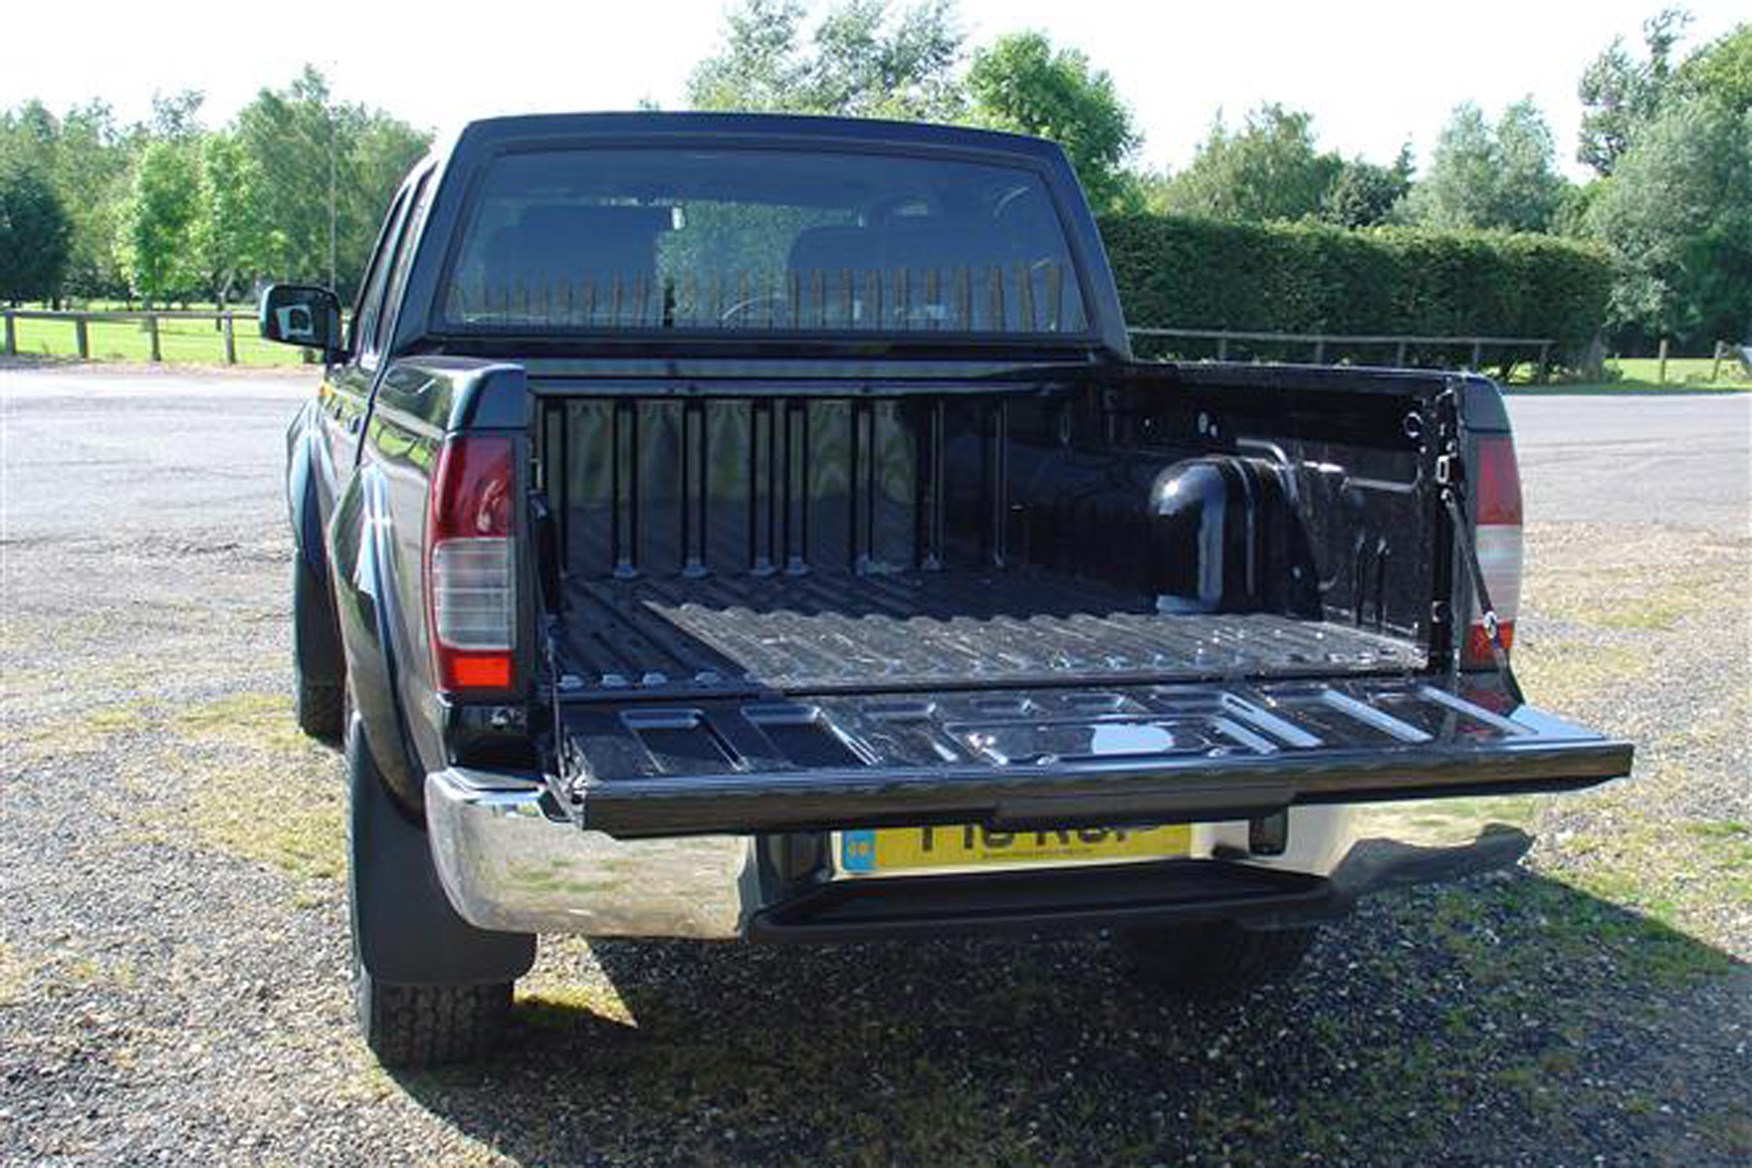 Nissan Navara 2001-2005 review on Parkers Vans - load area access